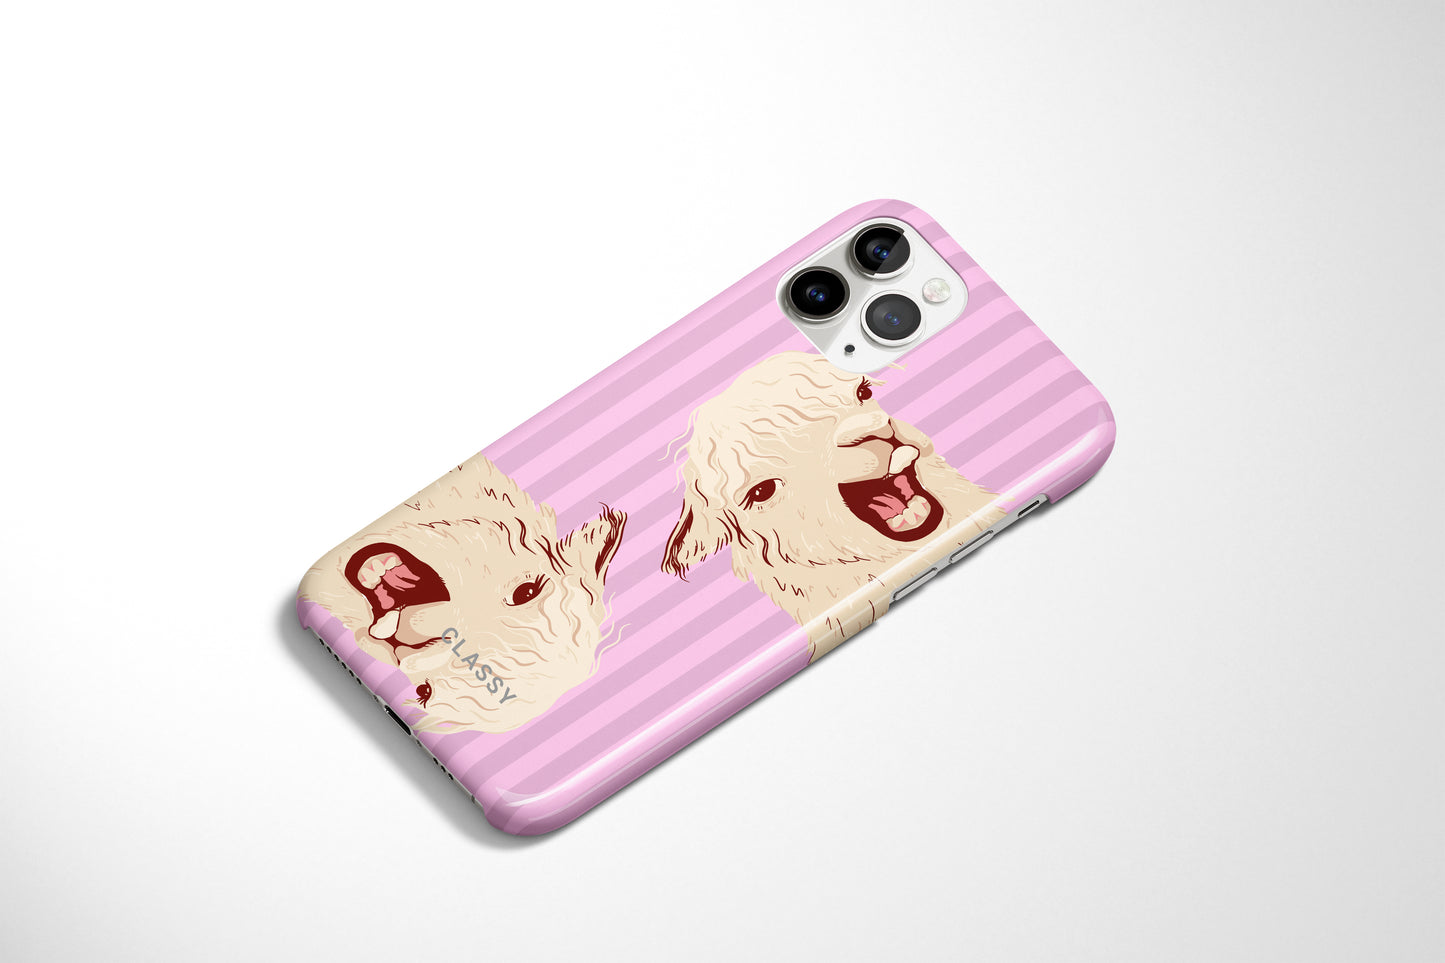 Pink Striped Llama Snap Case 2.0 - Classy Cases